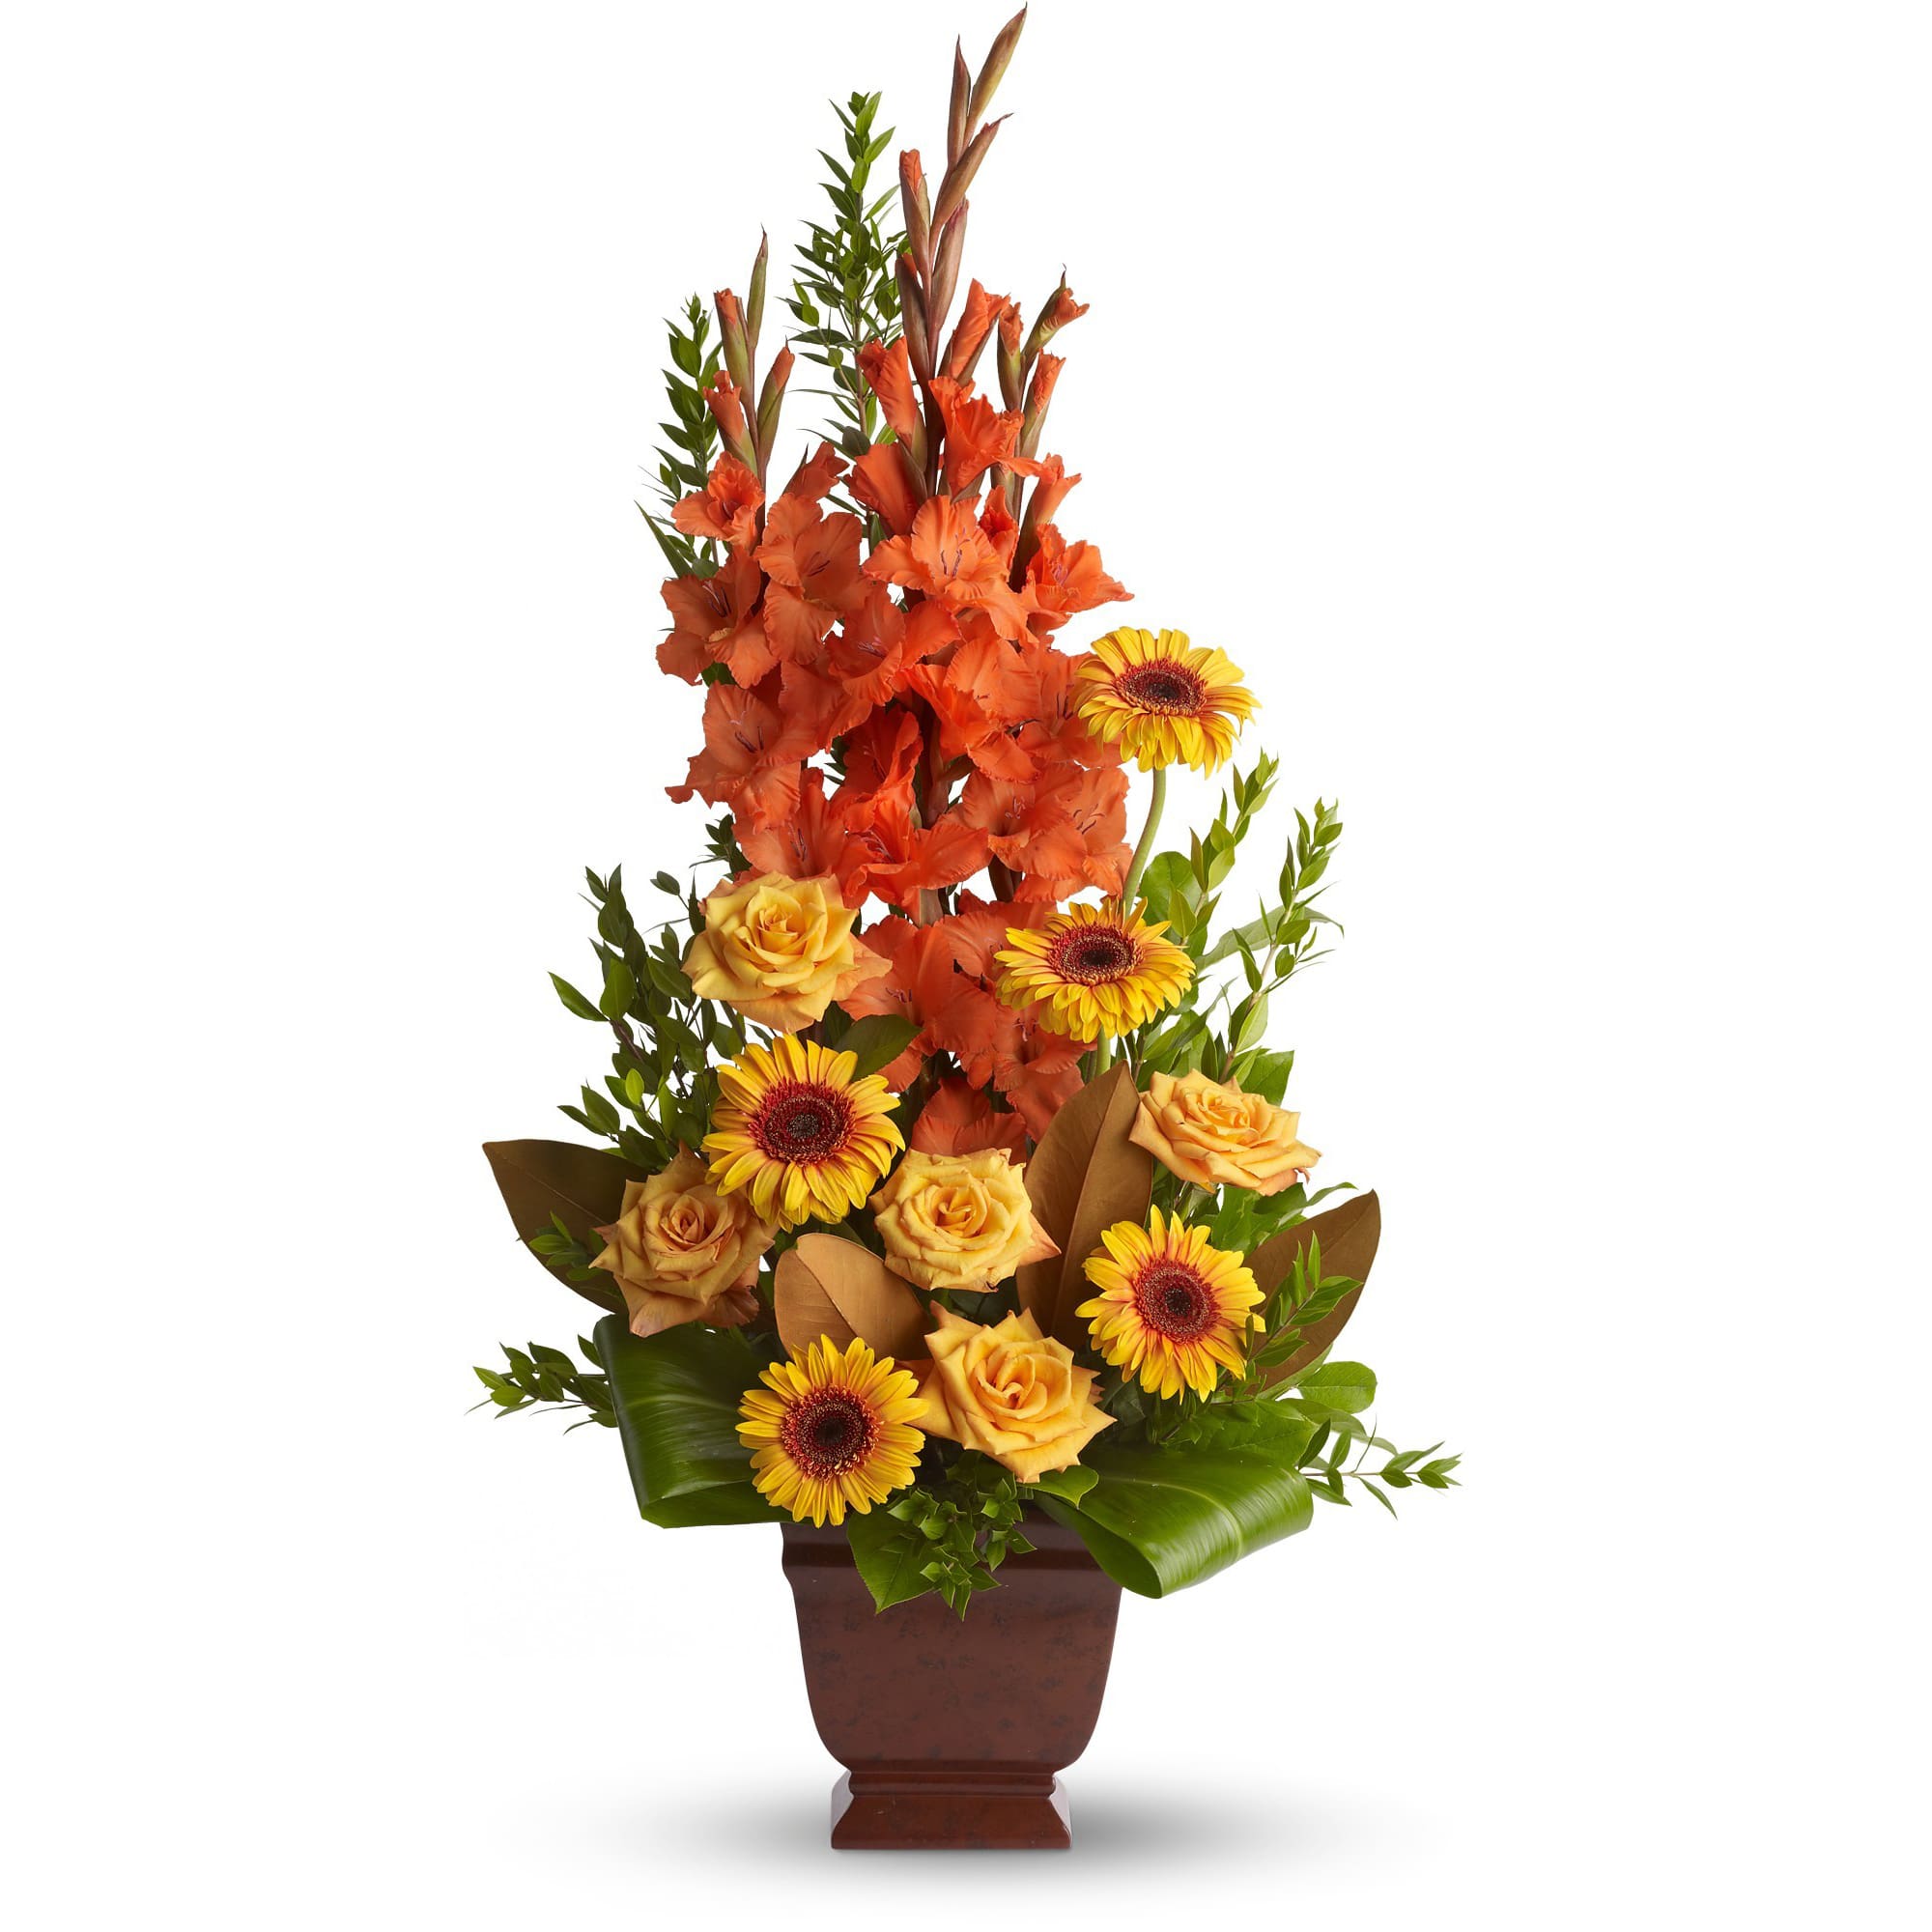 Teleflora's Sentimental Dreams - Because you will remember the loved one with every sunrise and every sunset. Because someone special made your life brighter. For these reasons and more, this brilliant arrangement will be much appreciated. 